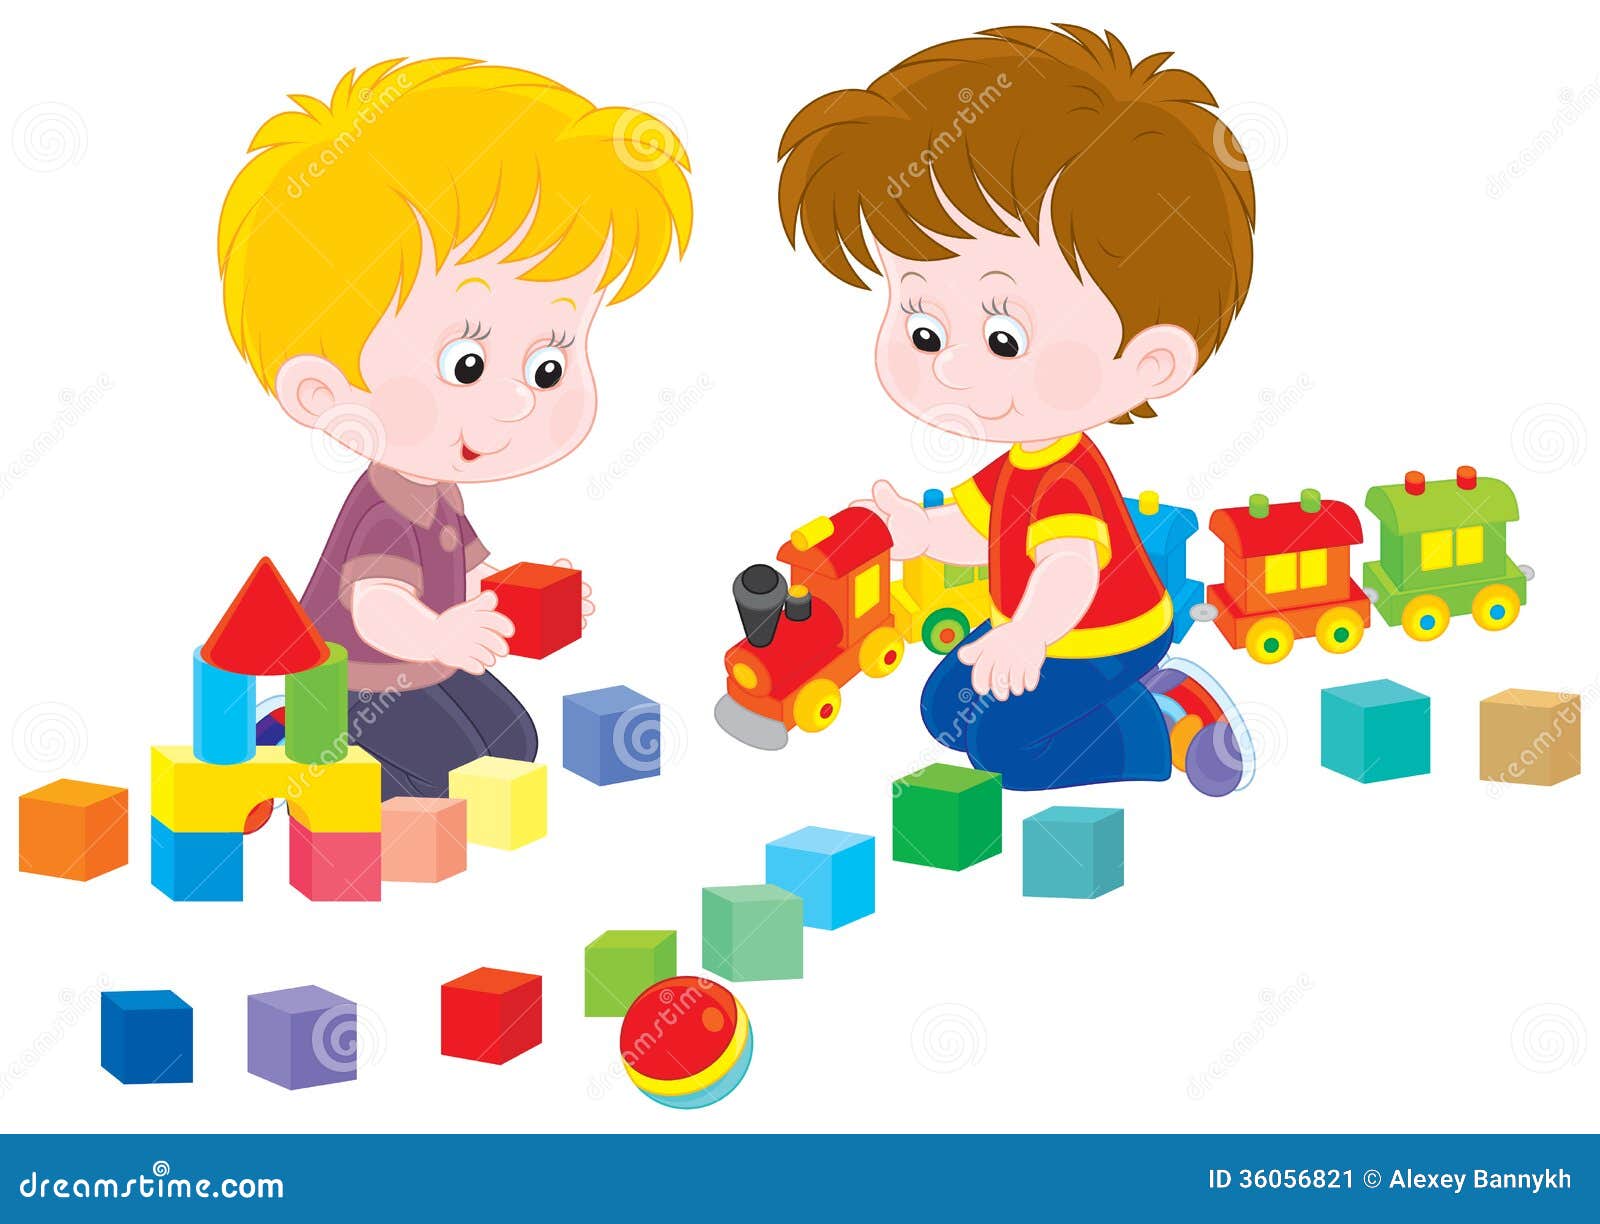 clipart sharing toys - photo #3